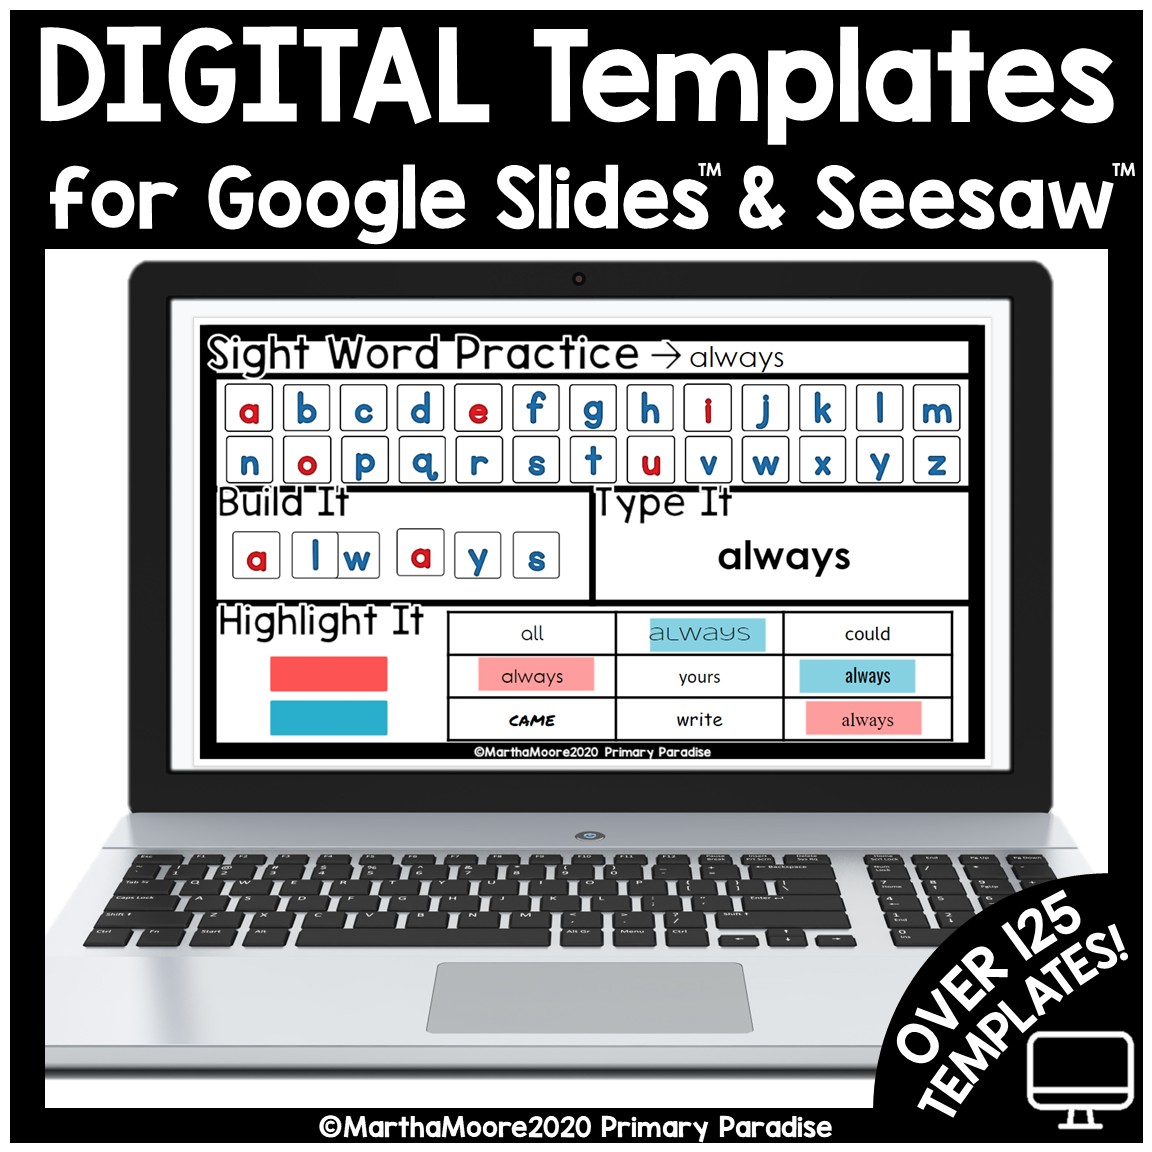 Digital Templates for Students Seesaw and Google Slides